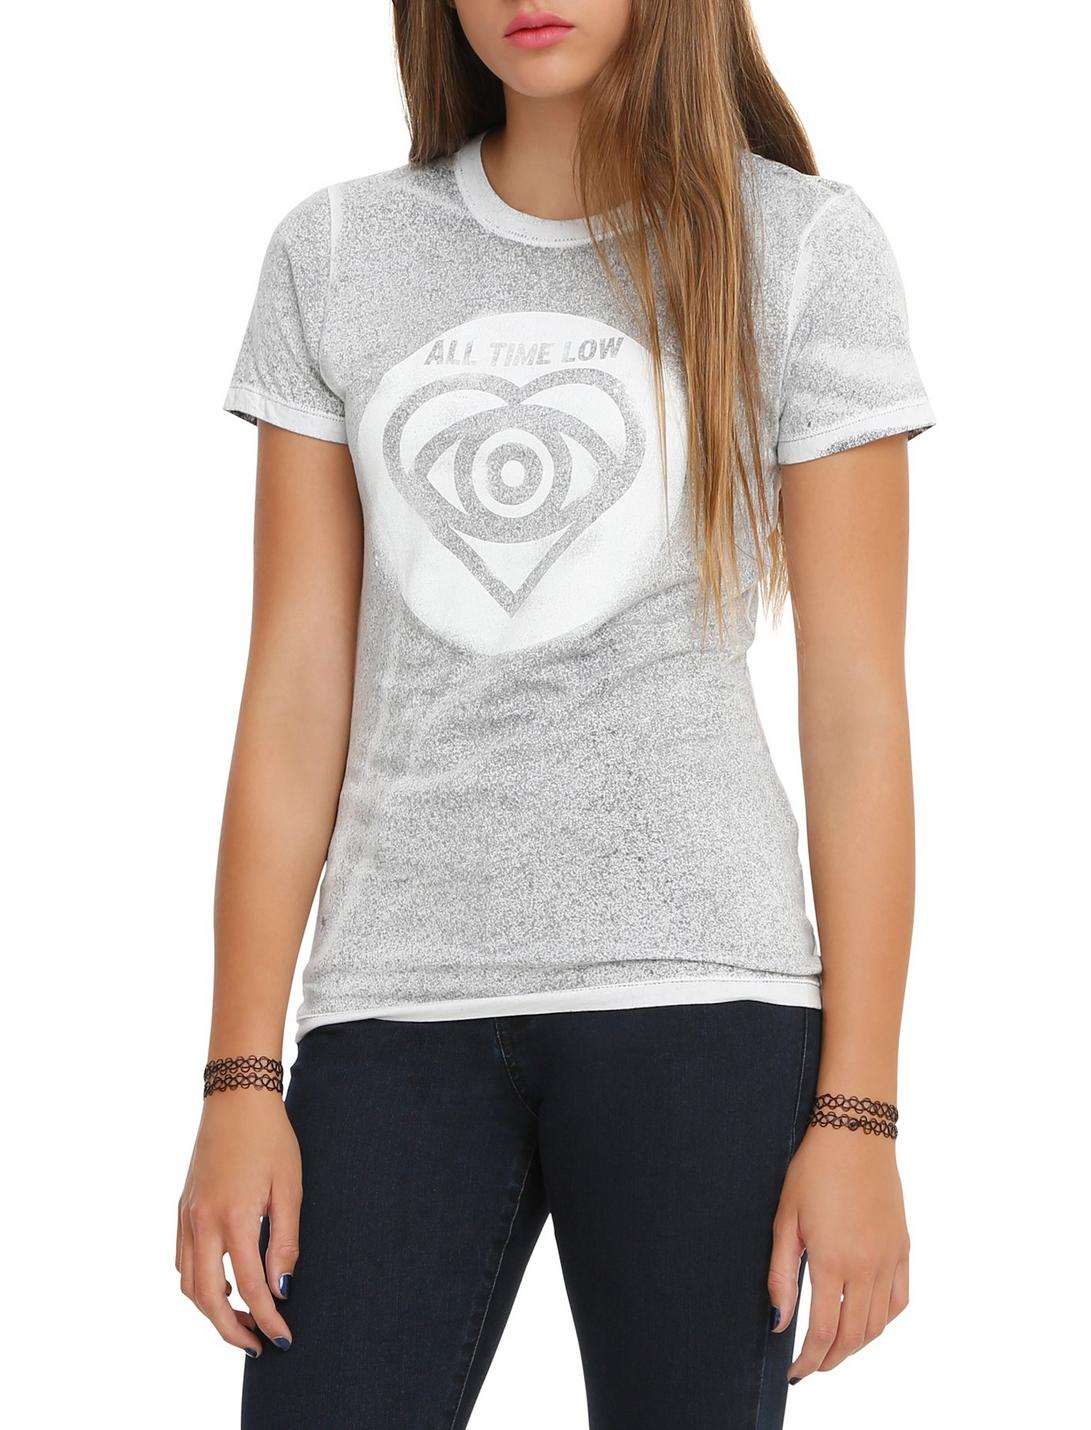 All Time Low Speckle Dye Girls T-Shirt, GREY, hi-res